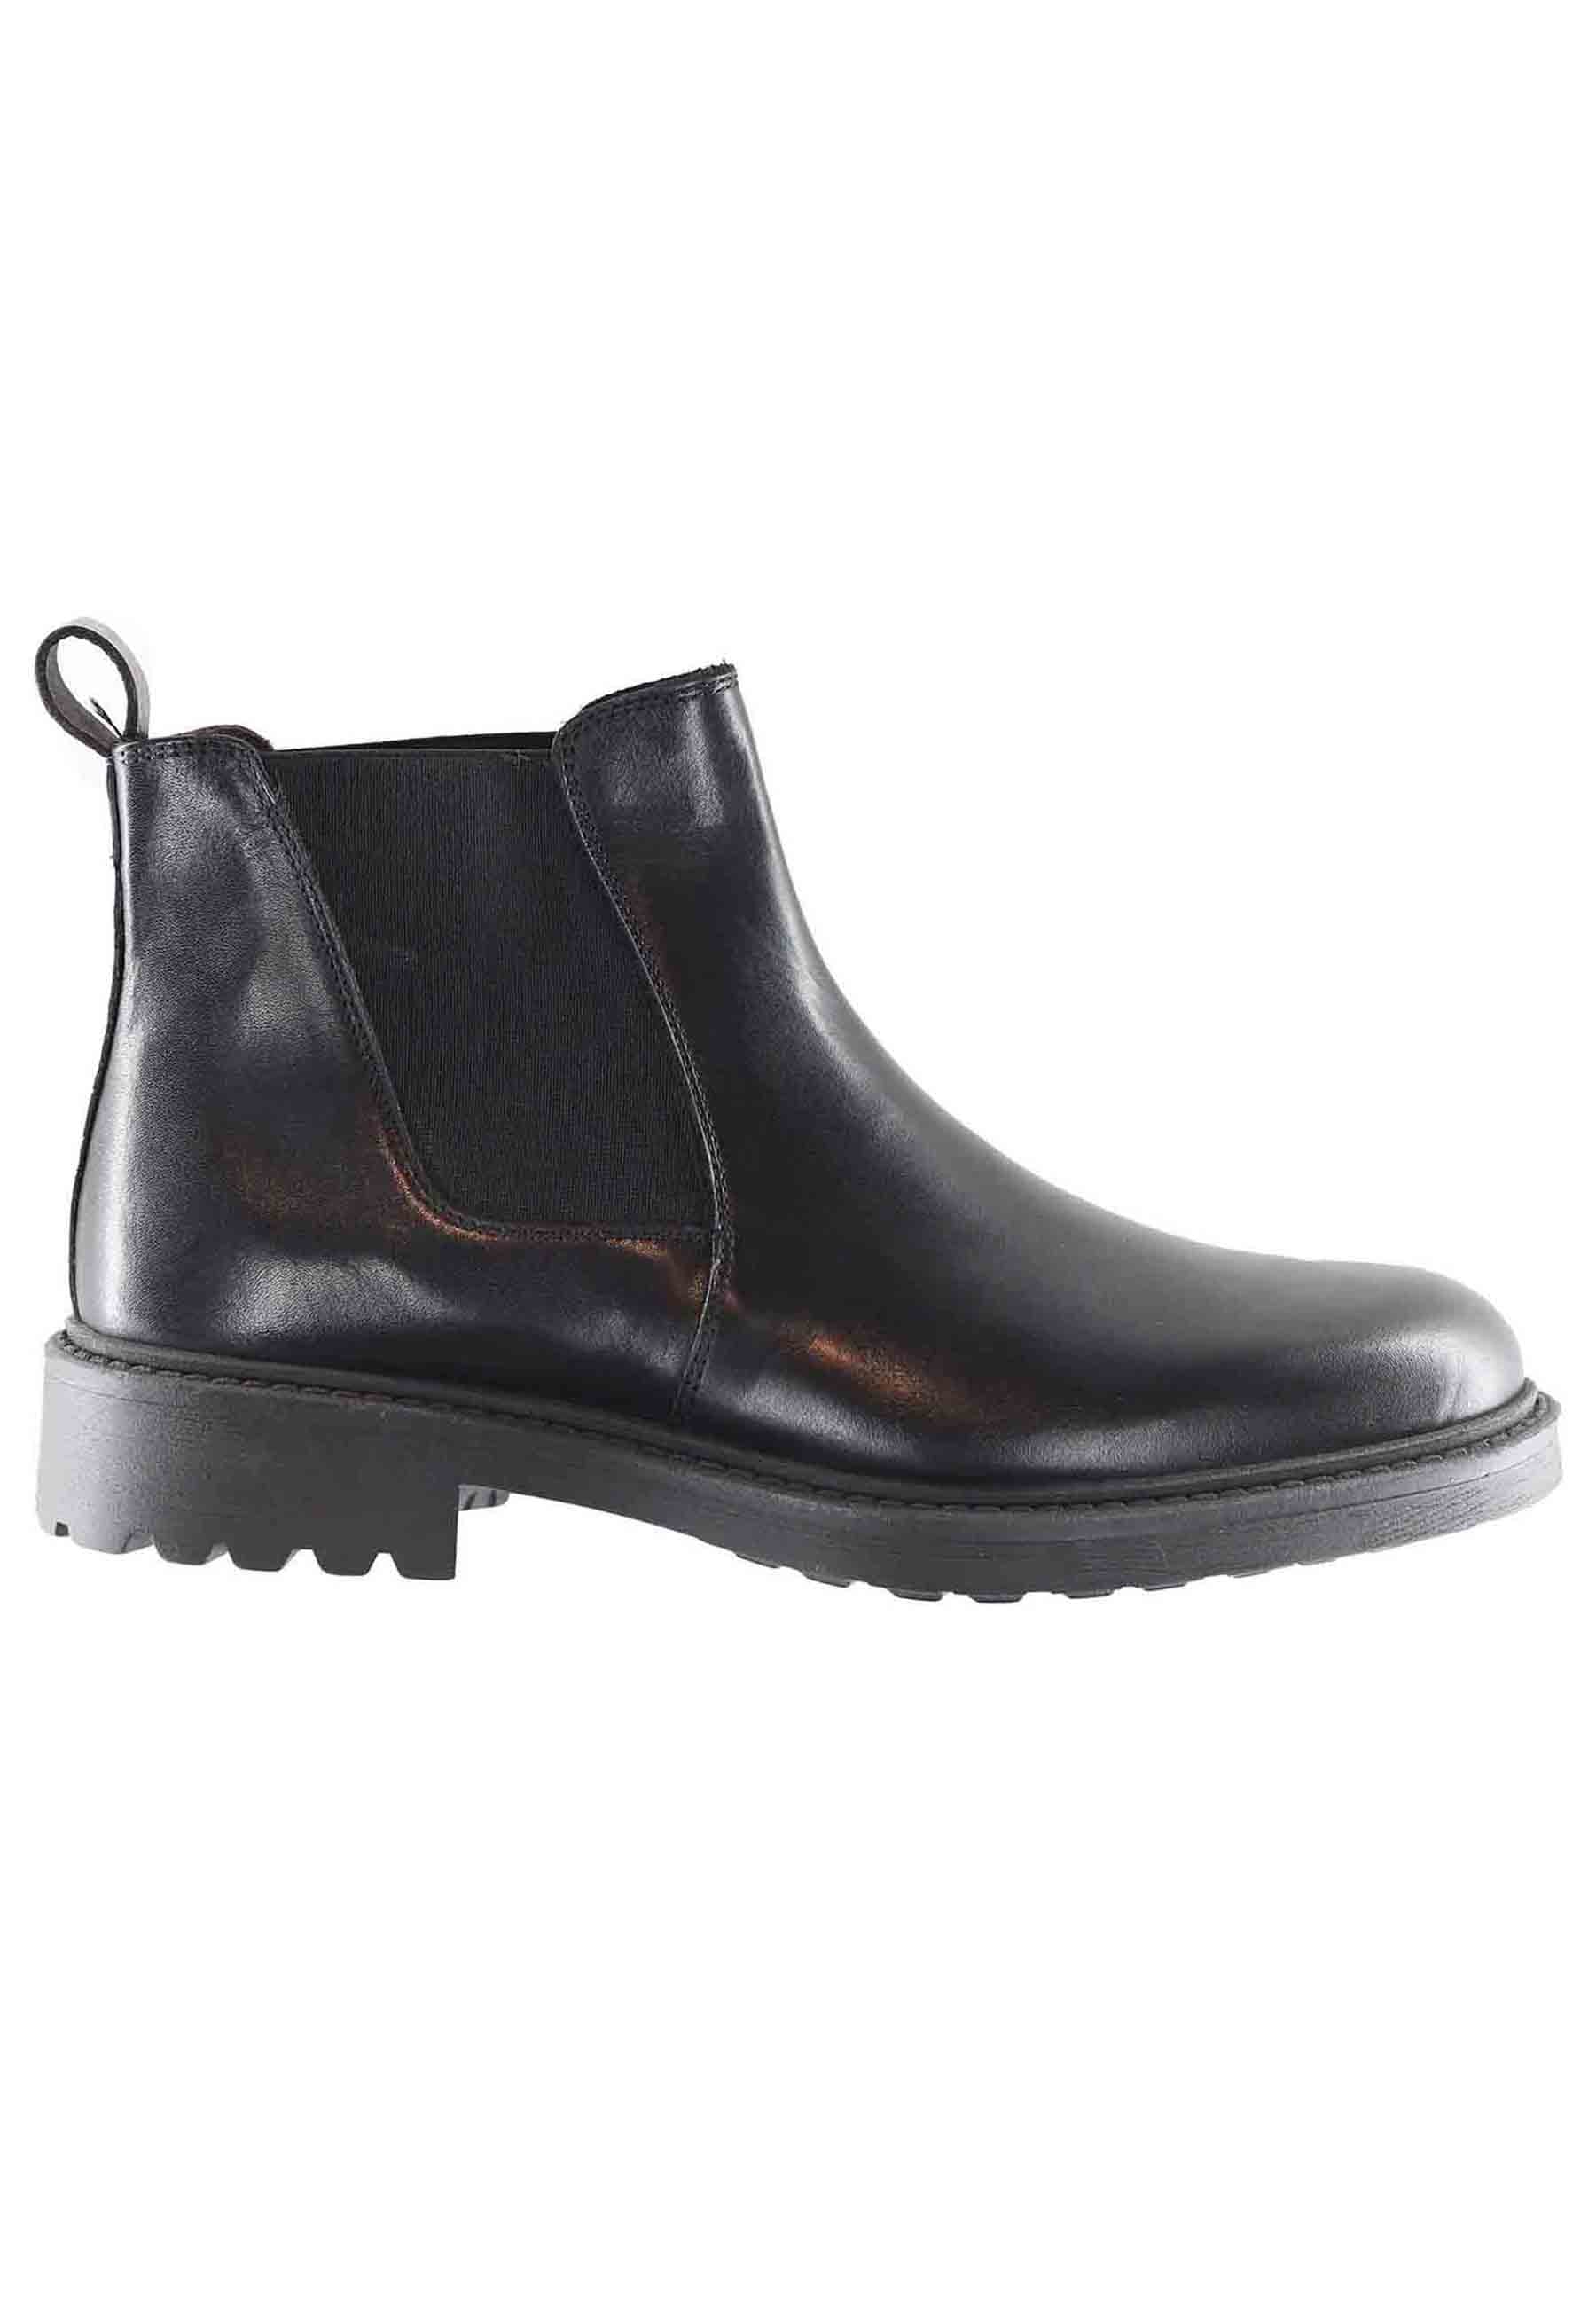 Men's chelsea boot in black leather with lug sole